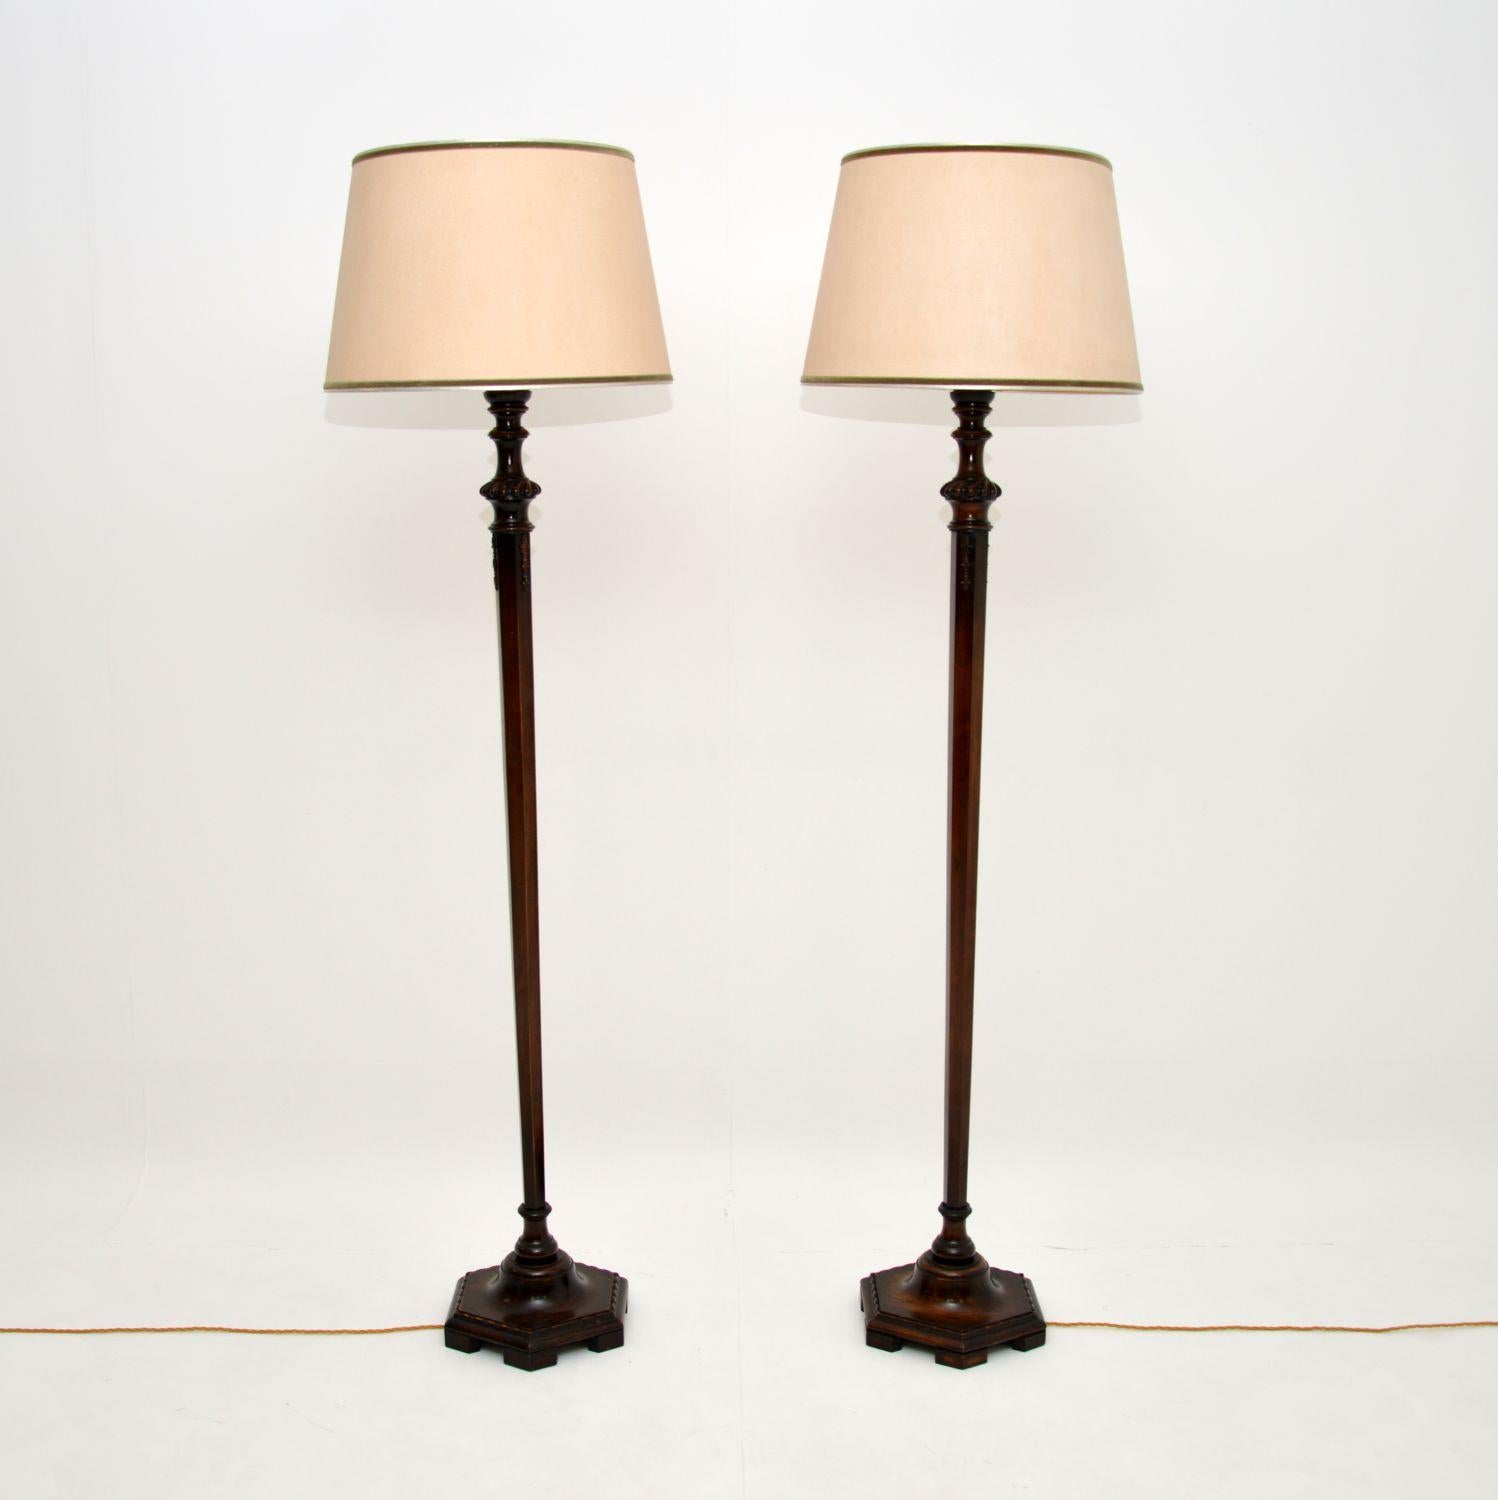 A beautiful pair of antique carved floor lamps, it is unusual to find a matching pair in this style. They were made in England, and date from the 1910-20’s period.

These lamps are of excellent quality, with lovely carving throughout. They are in